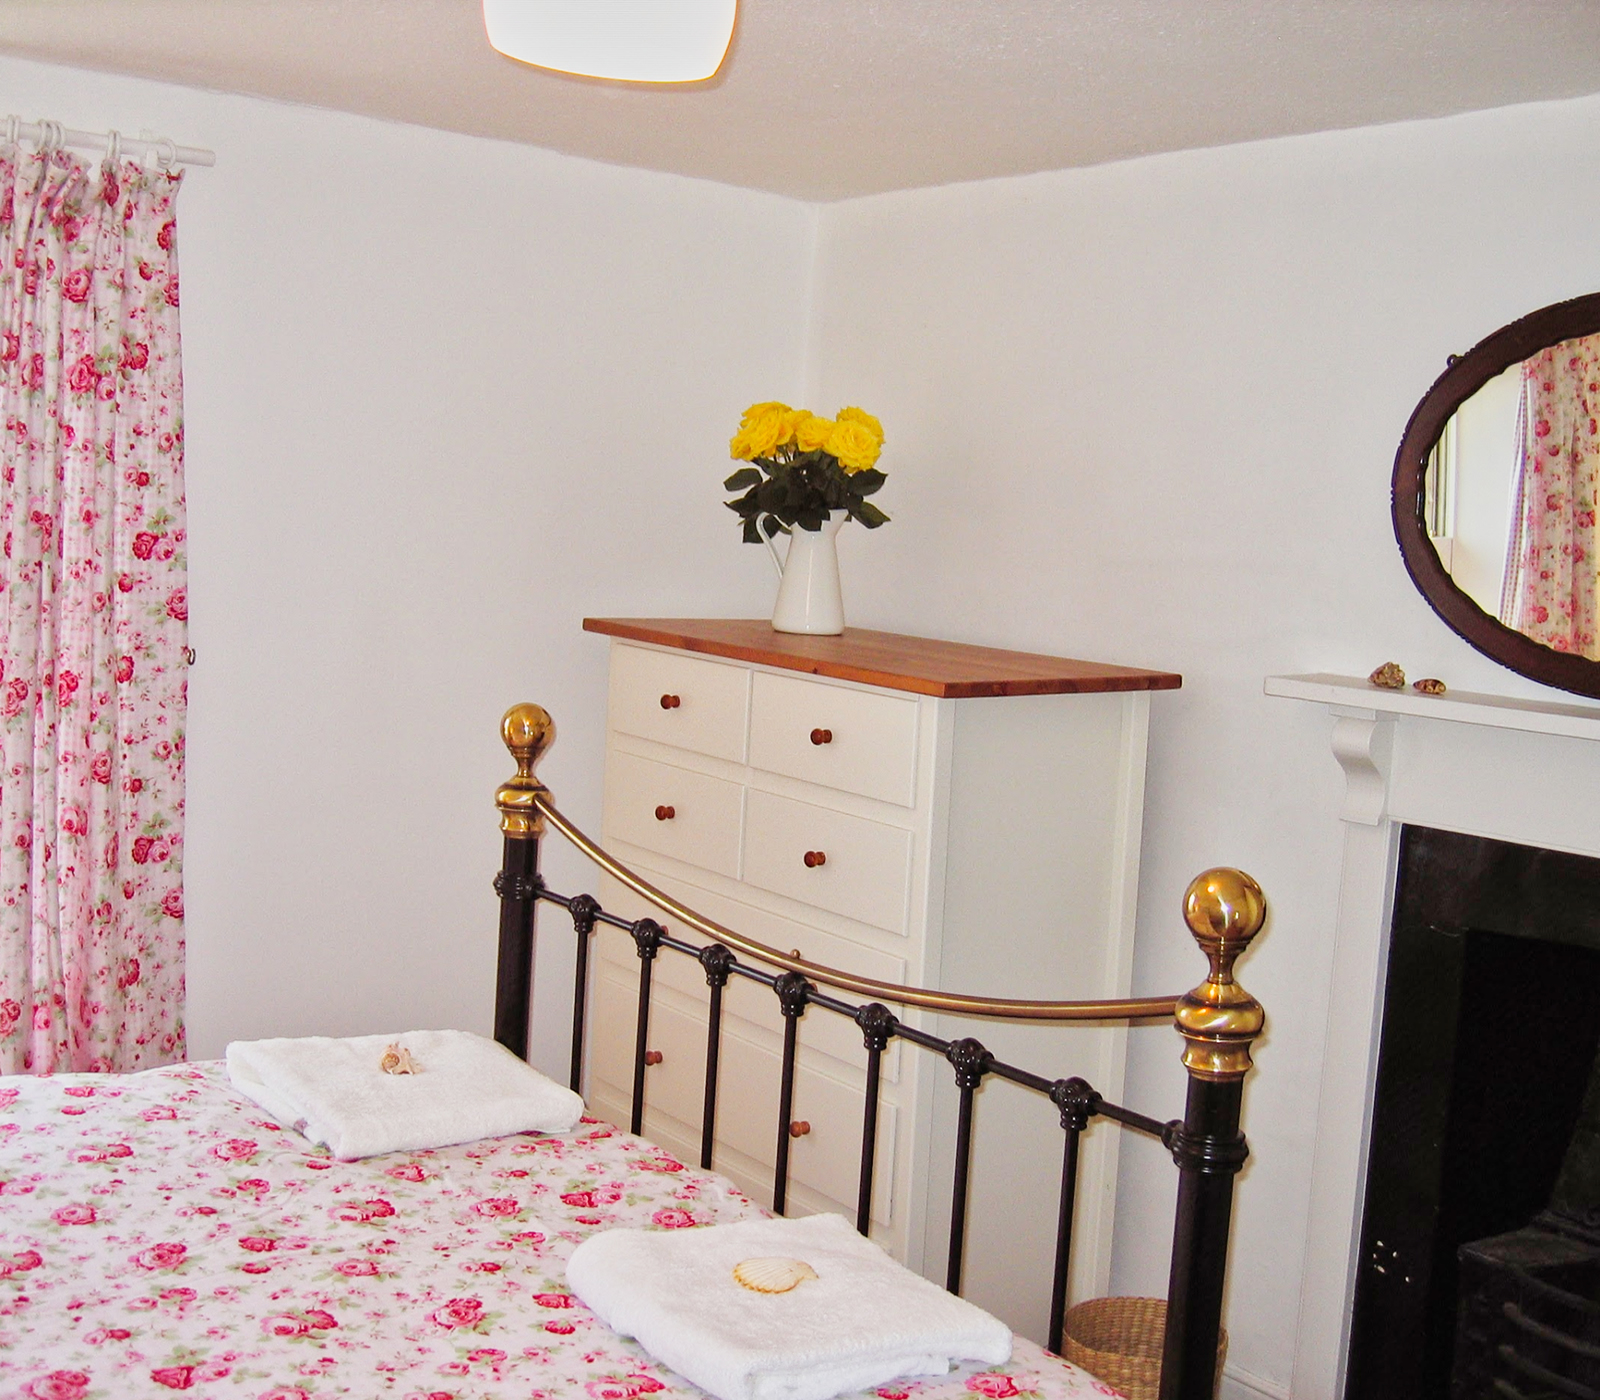 3 Bedroom Holiday Cottage